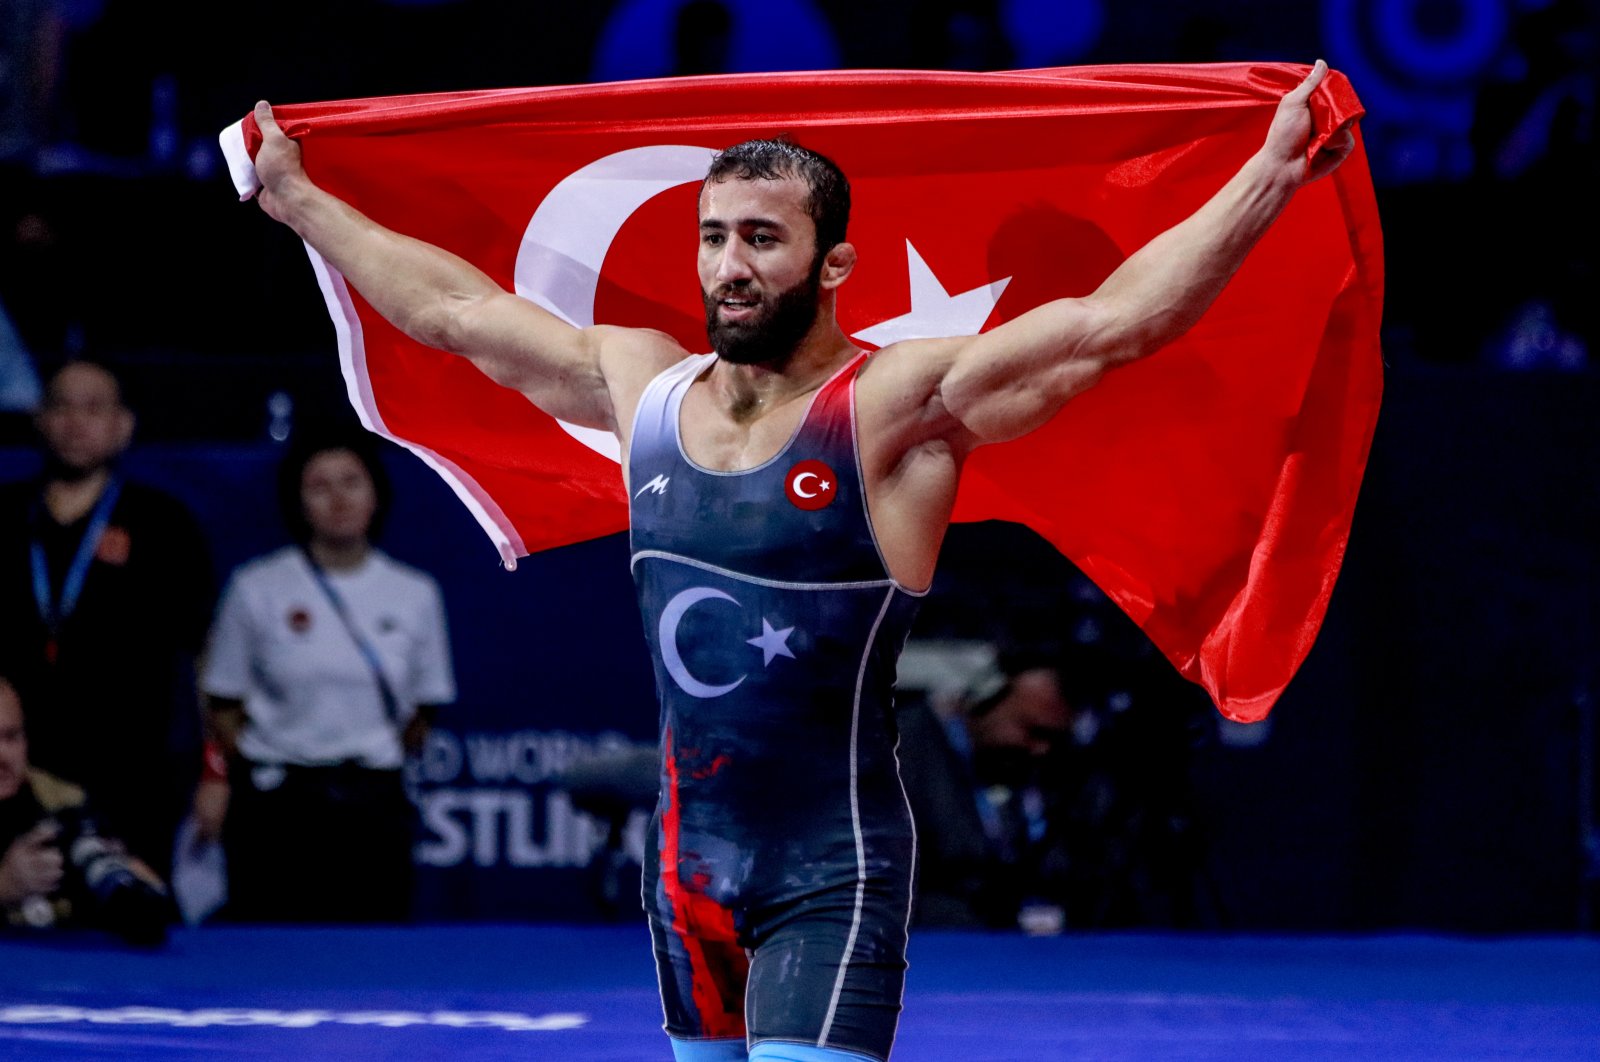 Burhan Akbudak of Türkiye celebrates by waving a national flag after winning gold in the men’s Greco-Roman 82 kg category at the World Wrestling Championships, Belgrade, Serbia, Sept. 12, 2022. (AA Photo)